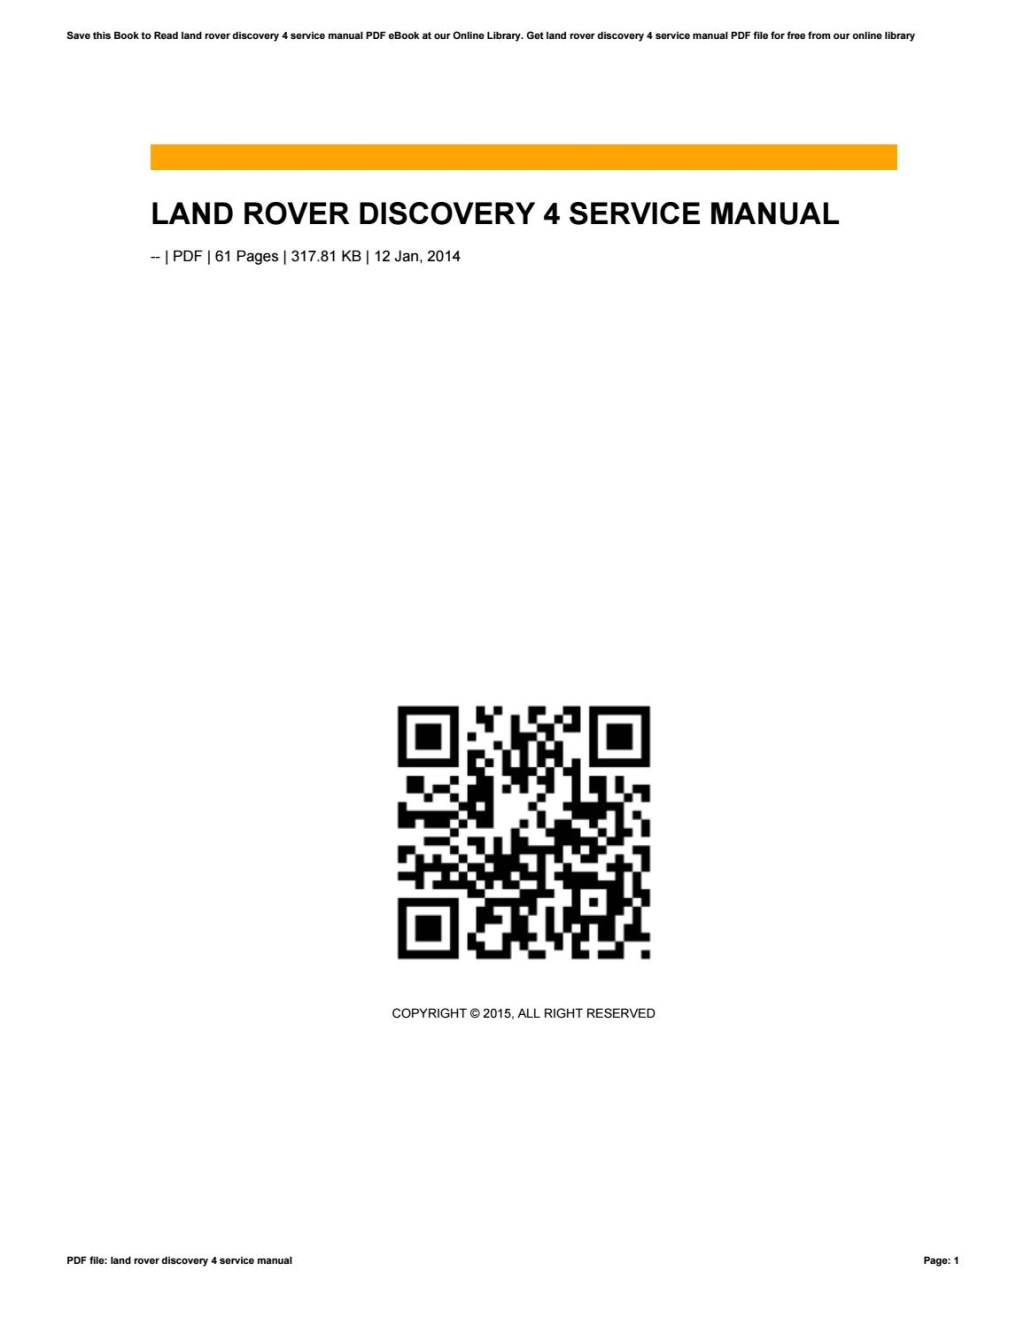 Picture of: Land rover discovery  service manual by lordsofts2 – Issuu